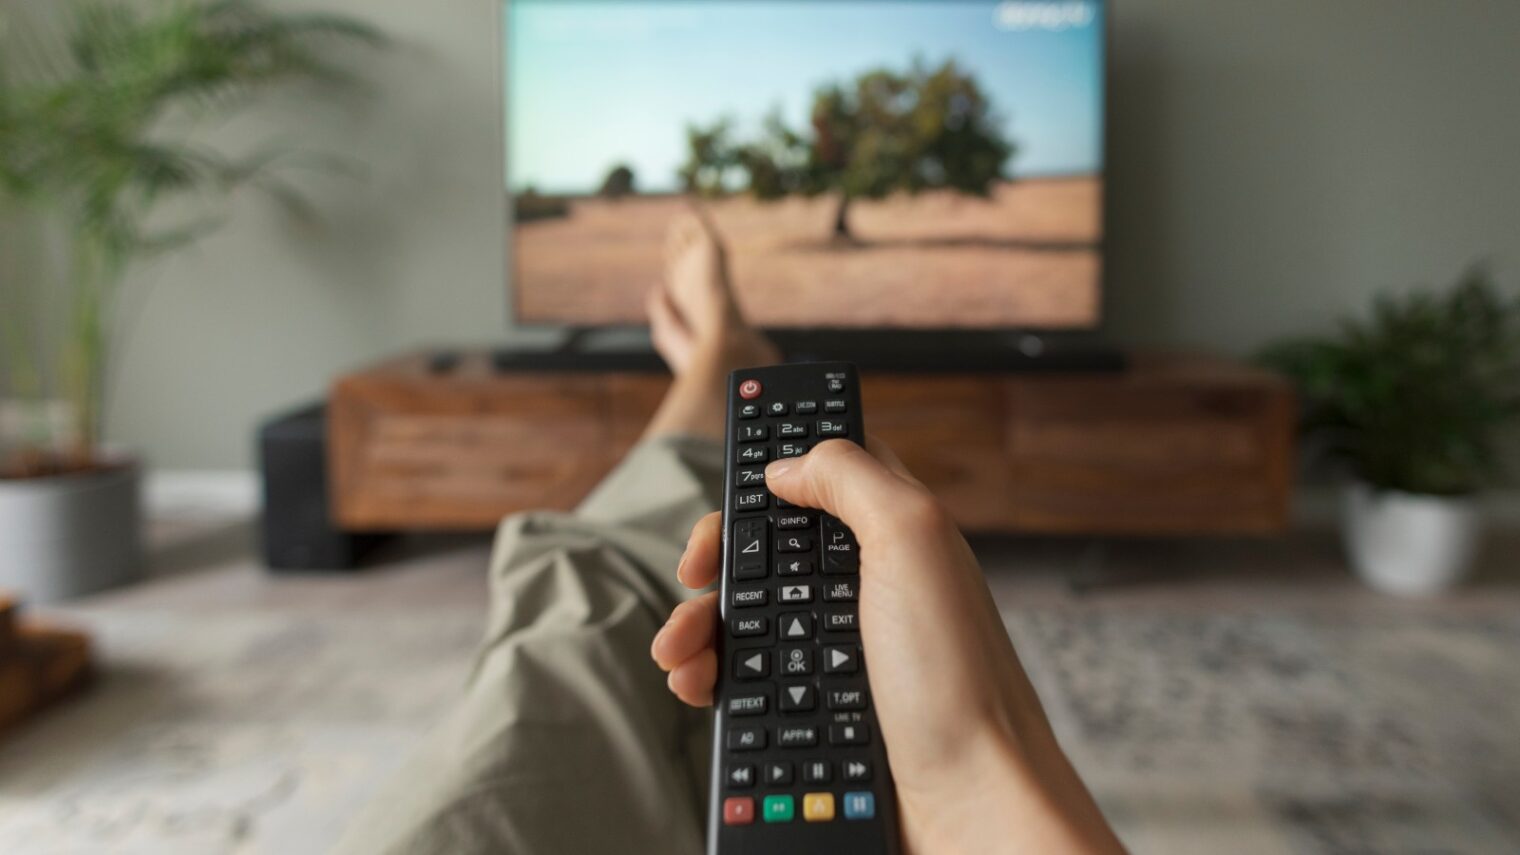 Check out the very best TV Israel has to offer to an international audience. Photo by Stokkete via Shutterstock.com